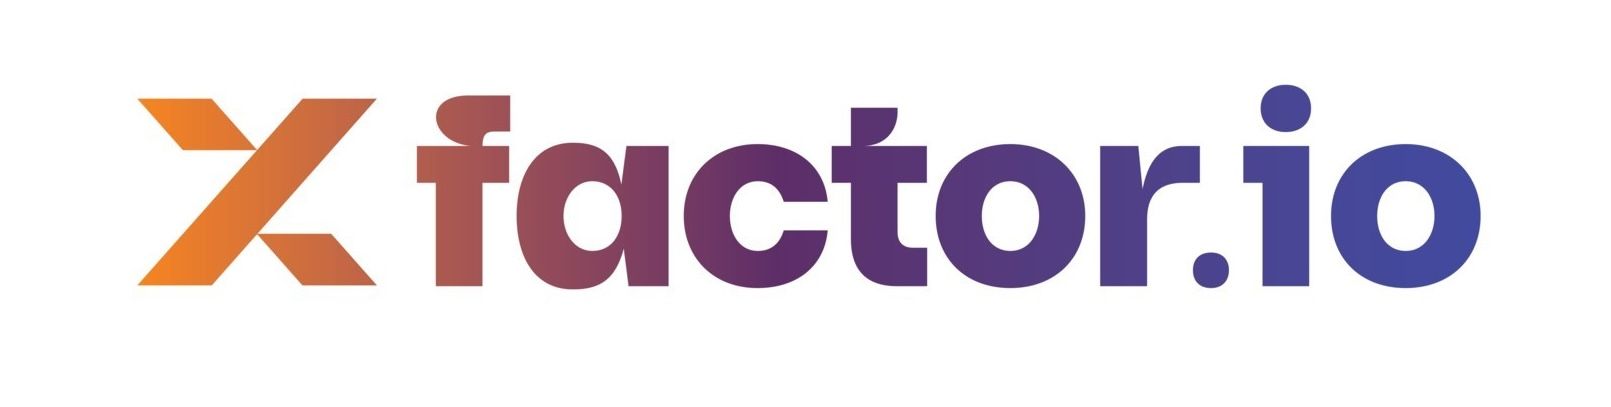 Xfactor.io secures $16M Series A backing